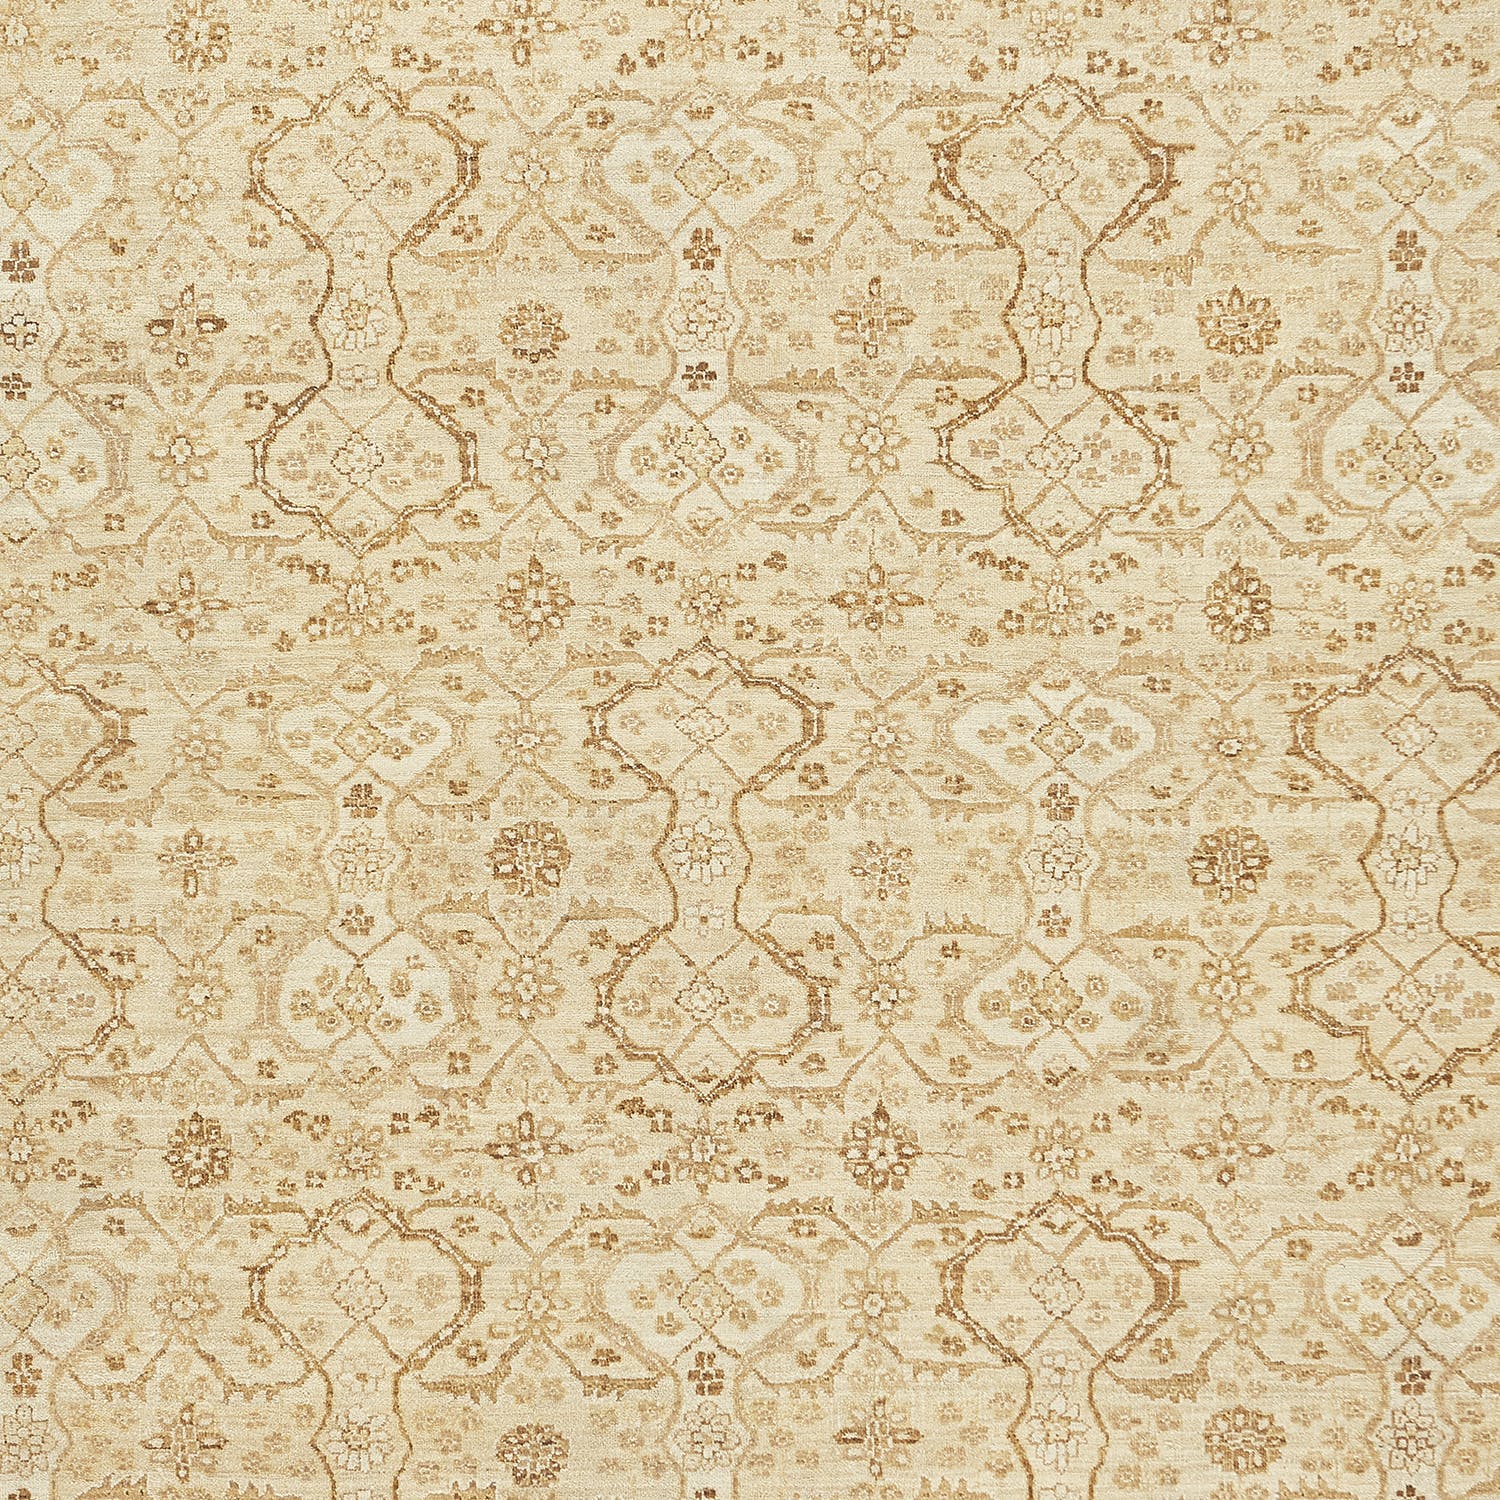 Detailed, symmetrical carpet pattern in earthy tones with floral motifs.